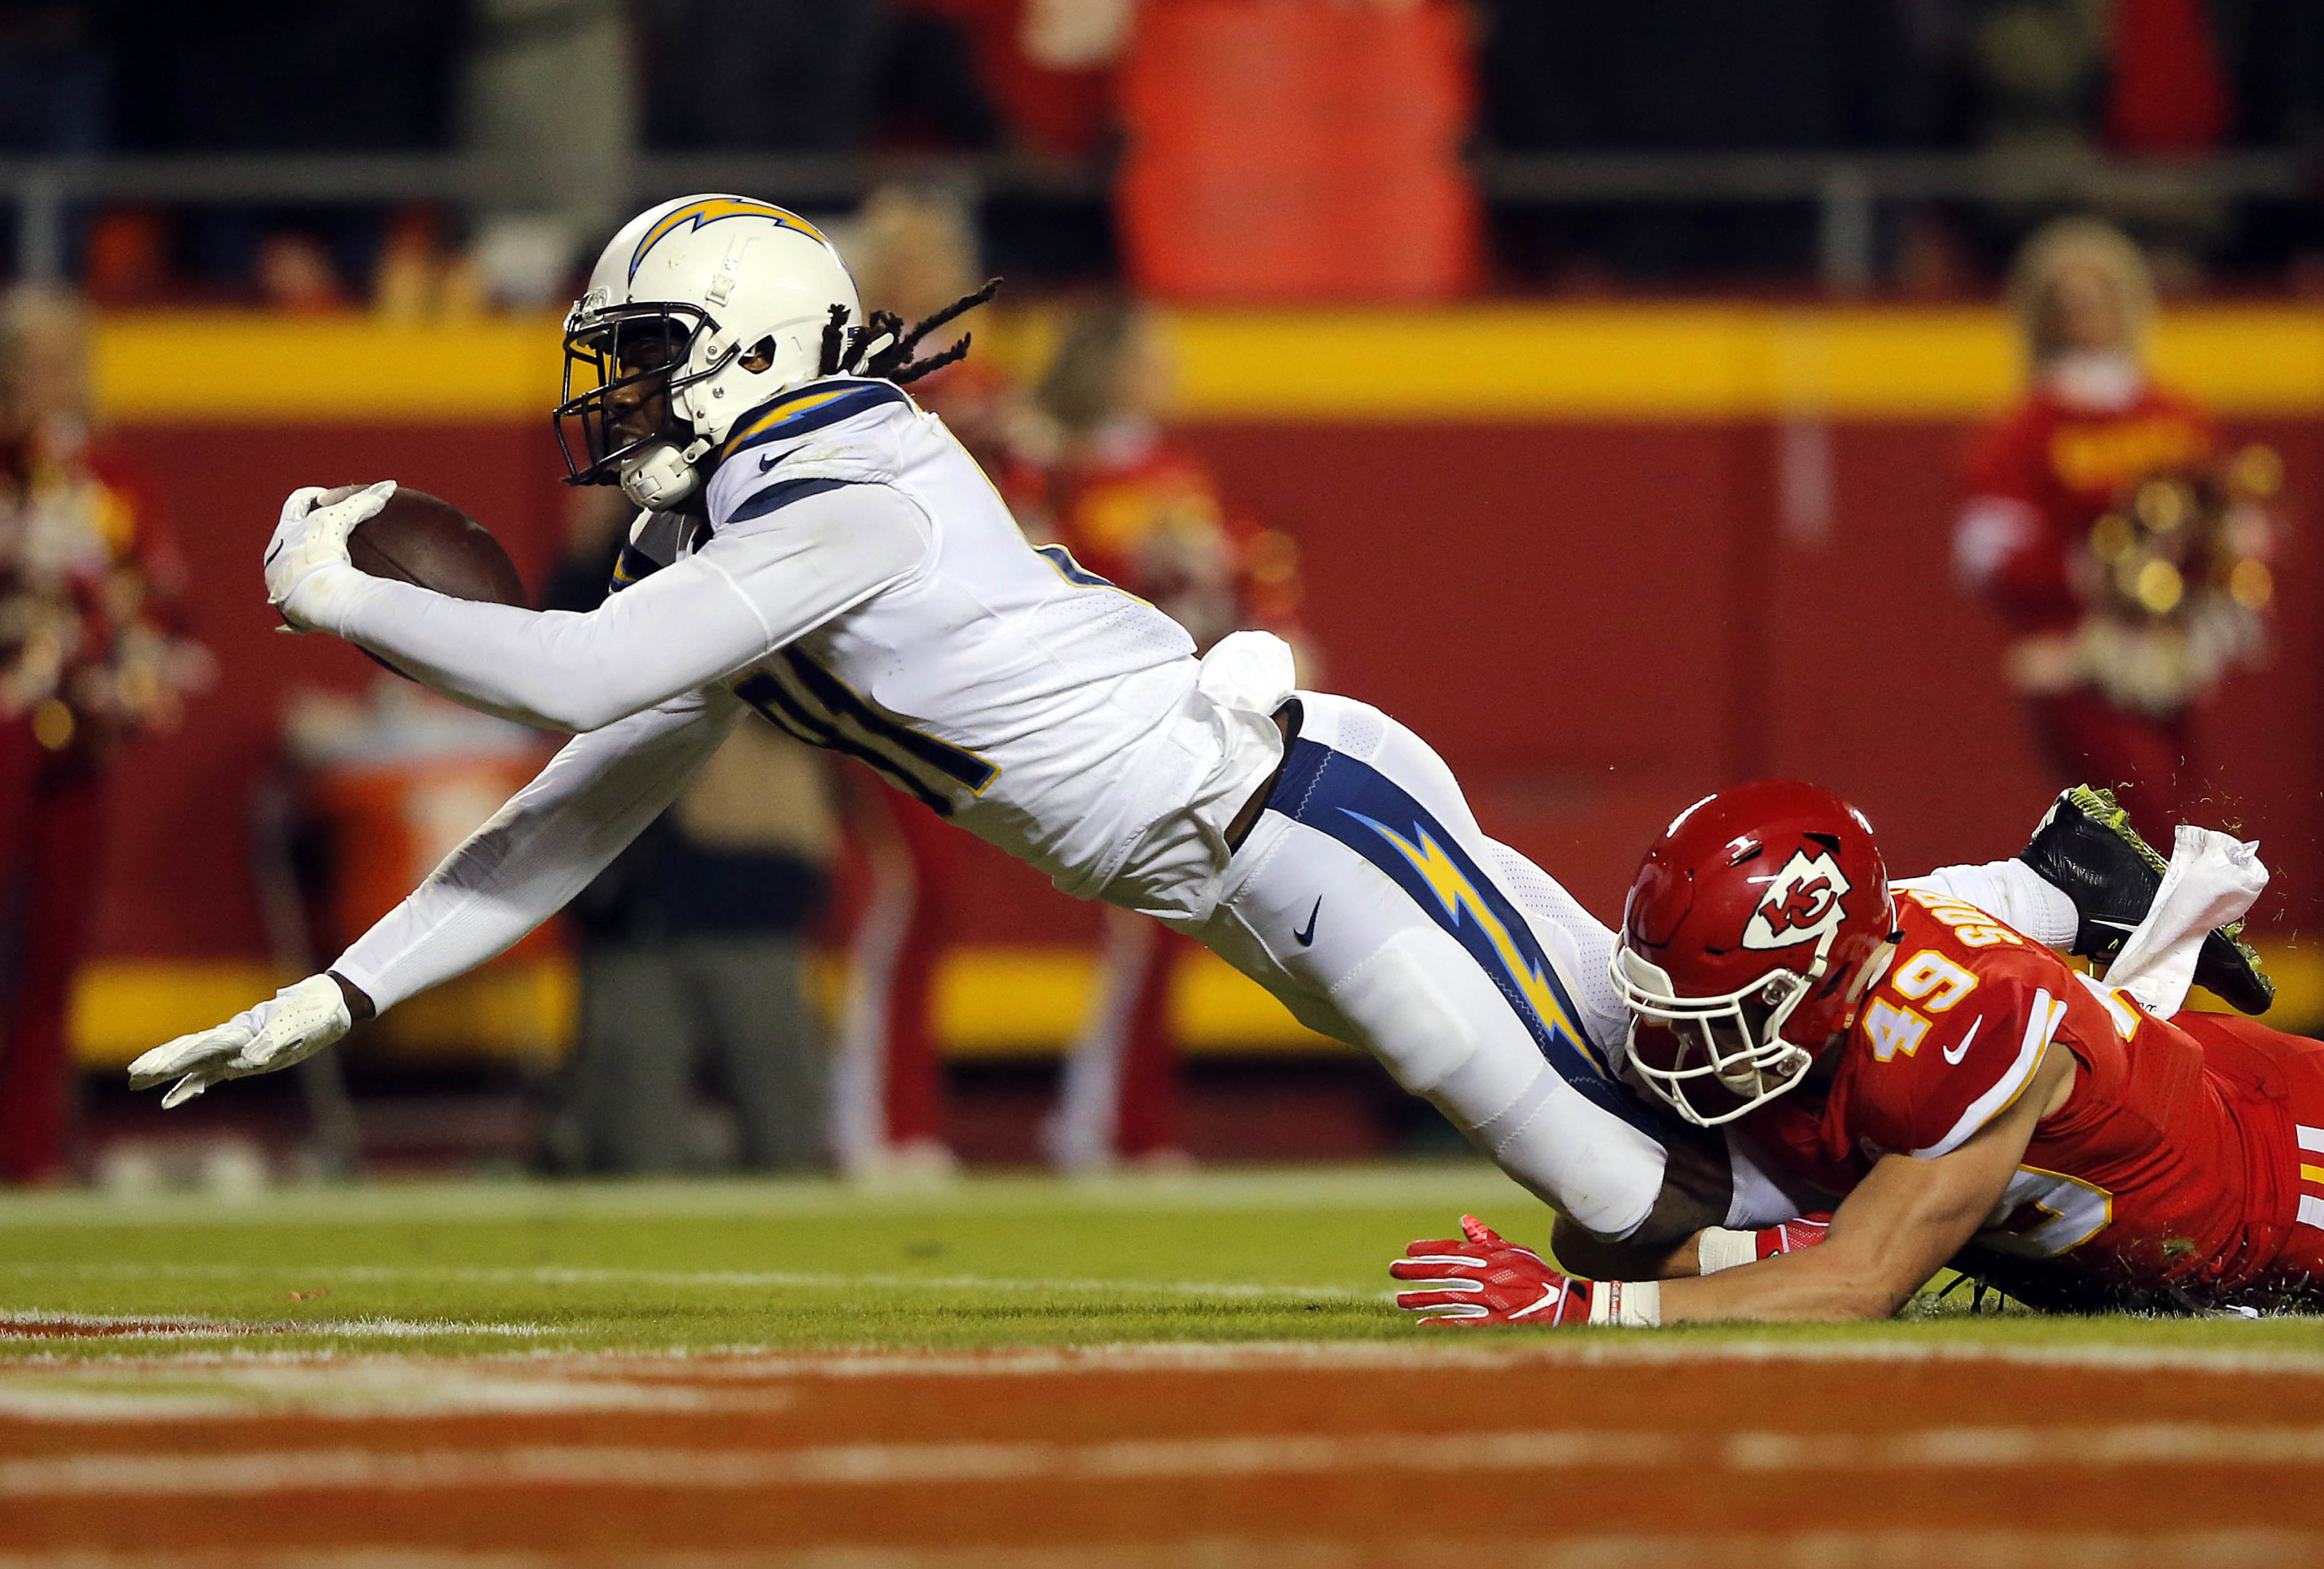 DraftKings Kansas Promo: Score Best Way to Bet on Chargers-Chiefs